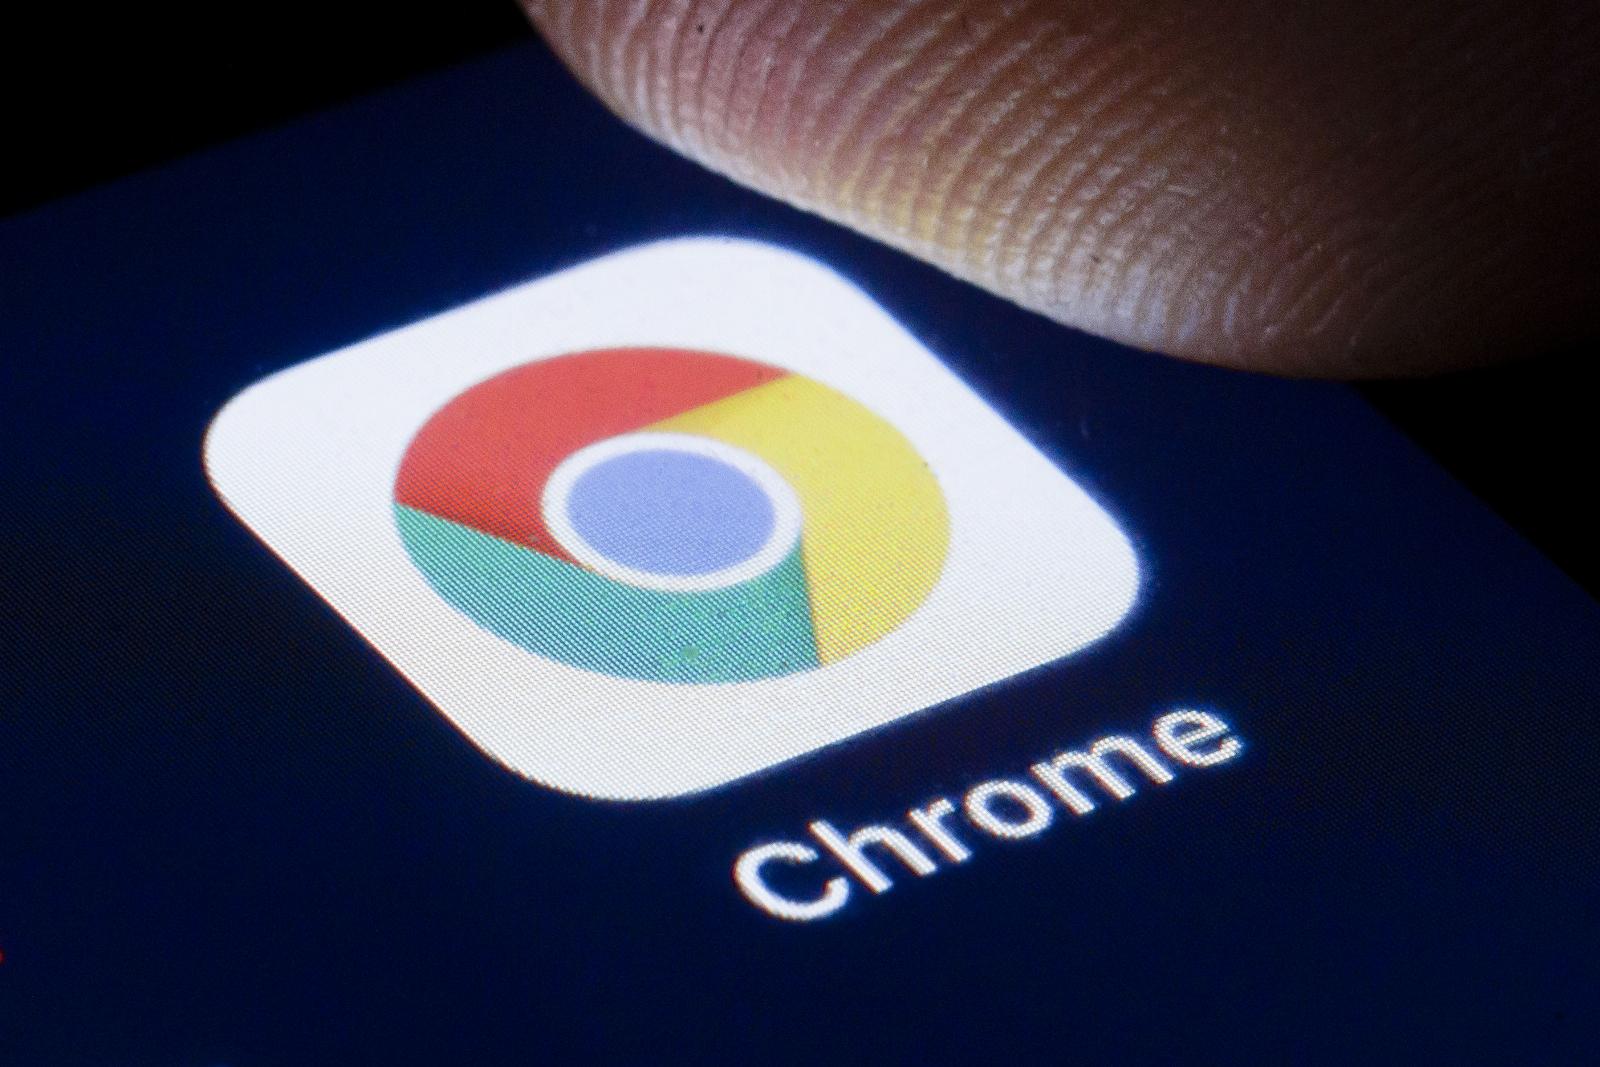 Chrome’s search bar now has smarter autocomplete, automatic typo fixes and more